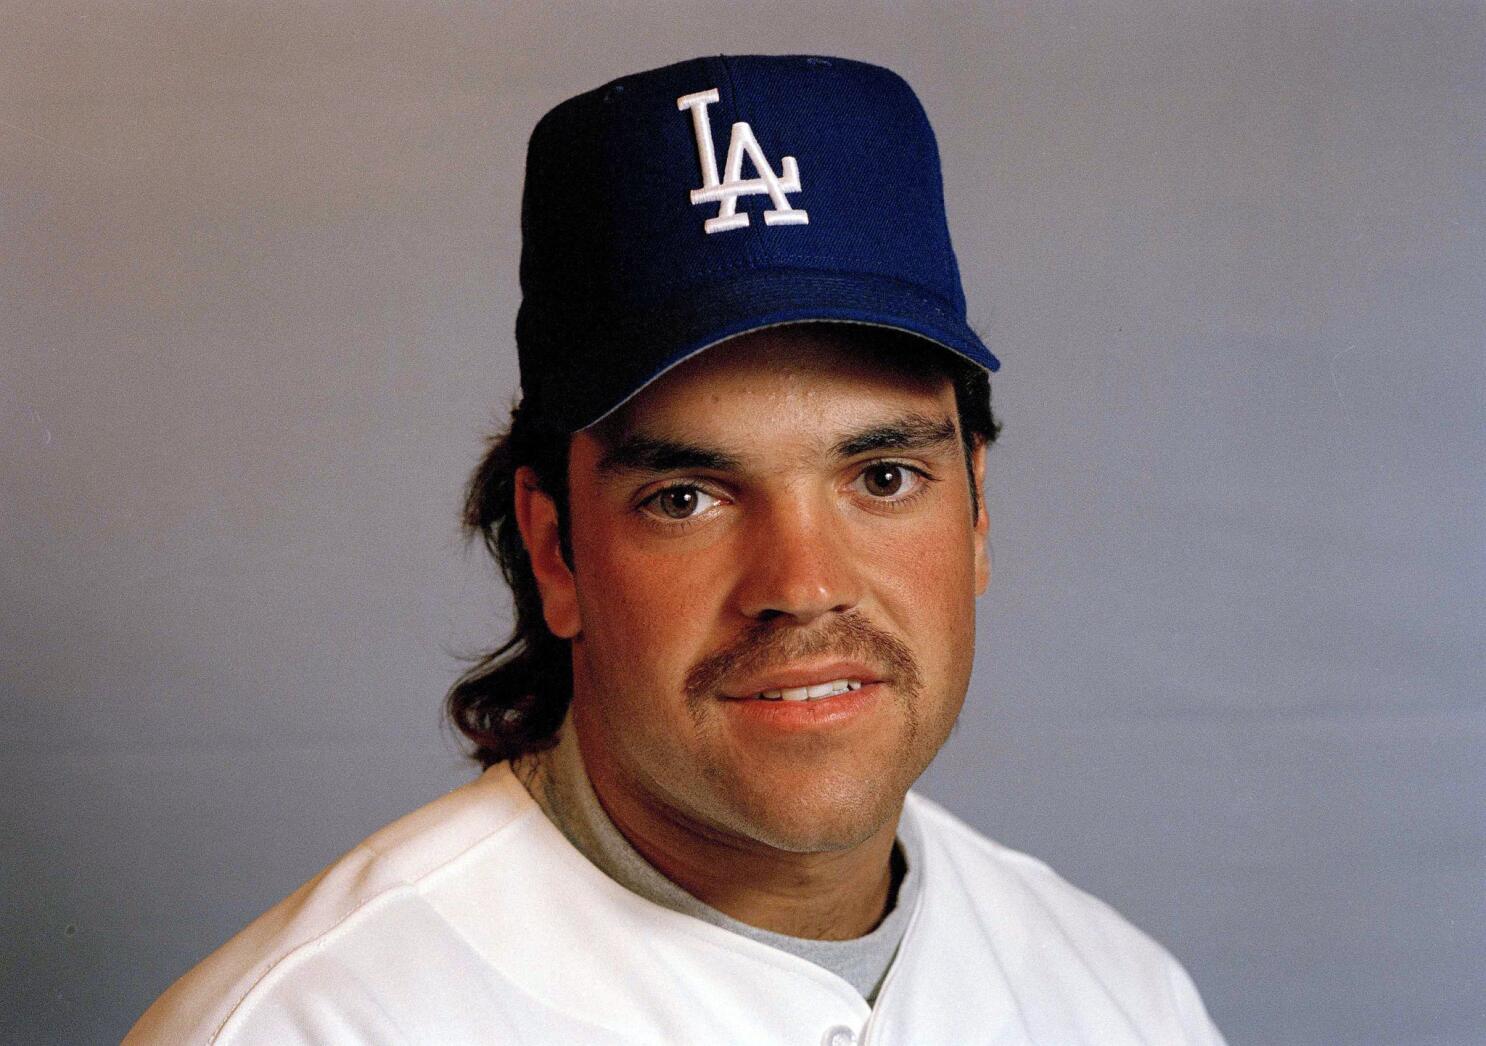 Mike Piazza has made it hard for Dodgers fans to share his